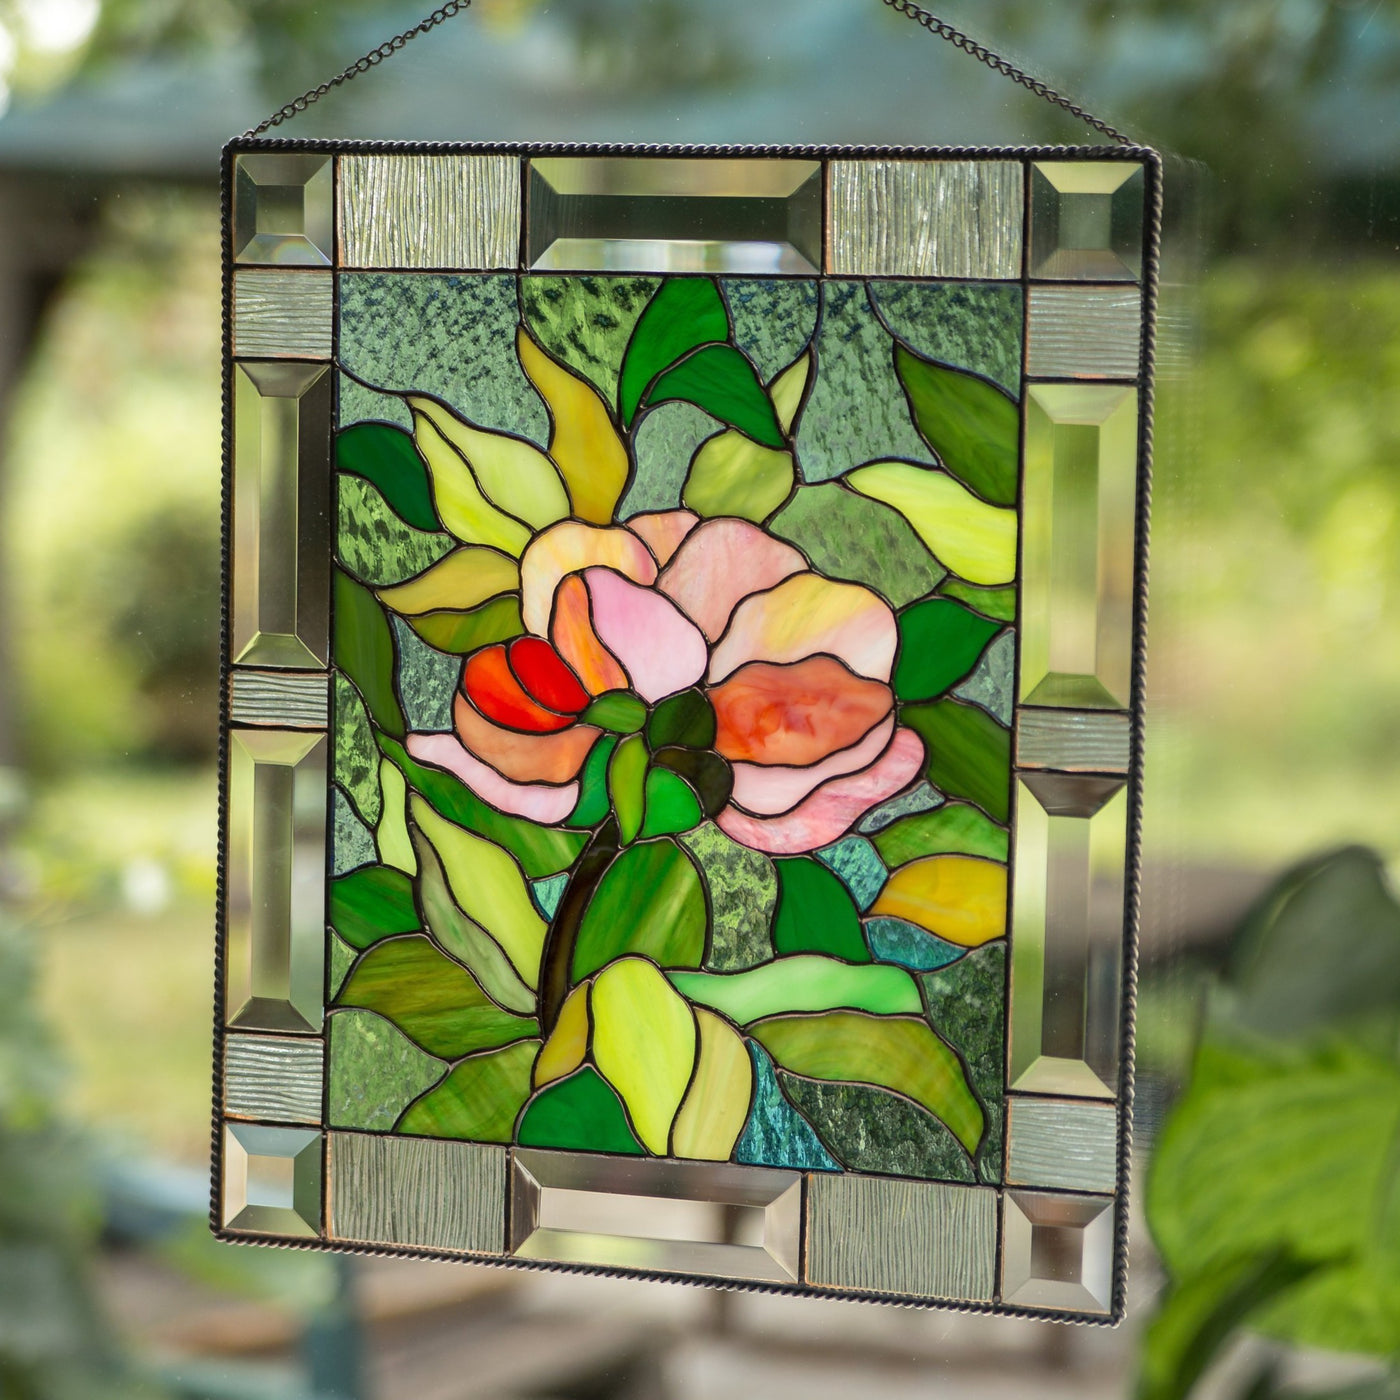 Stained glass panel depicting peony flower with leaves on the background